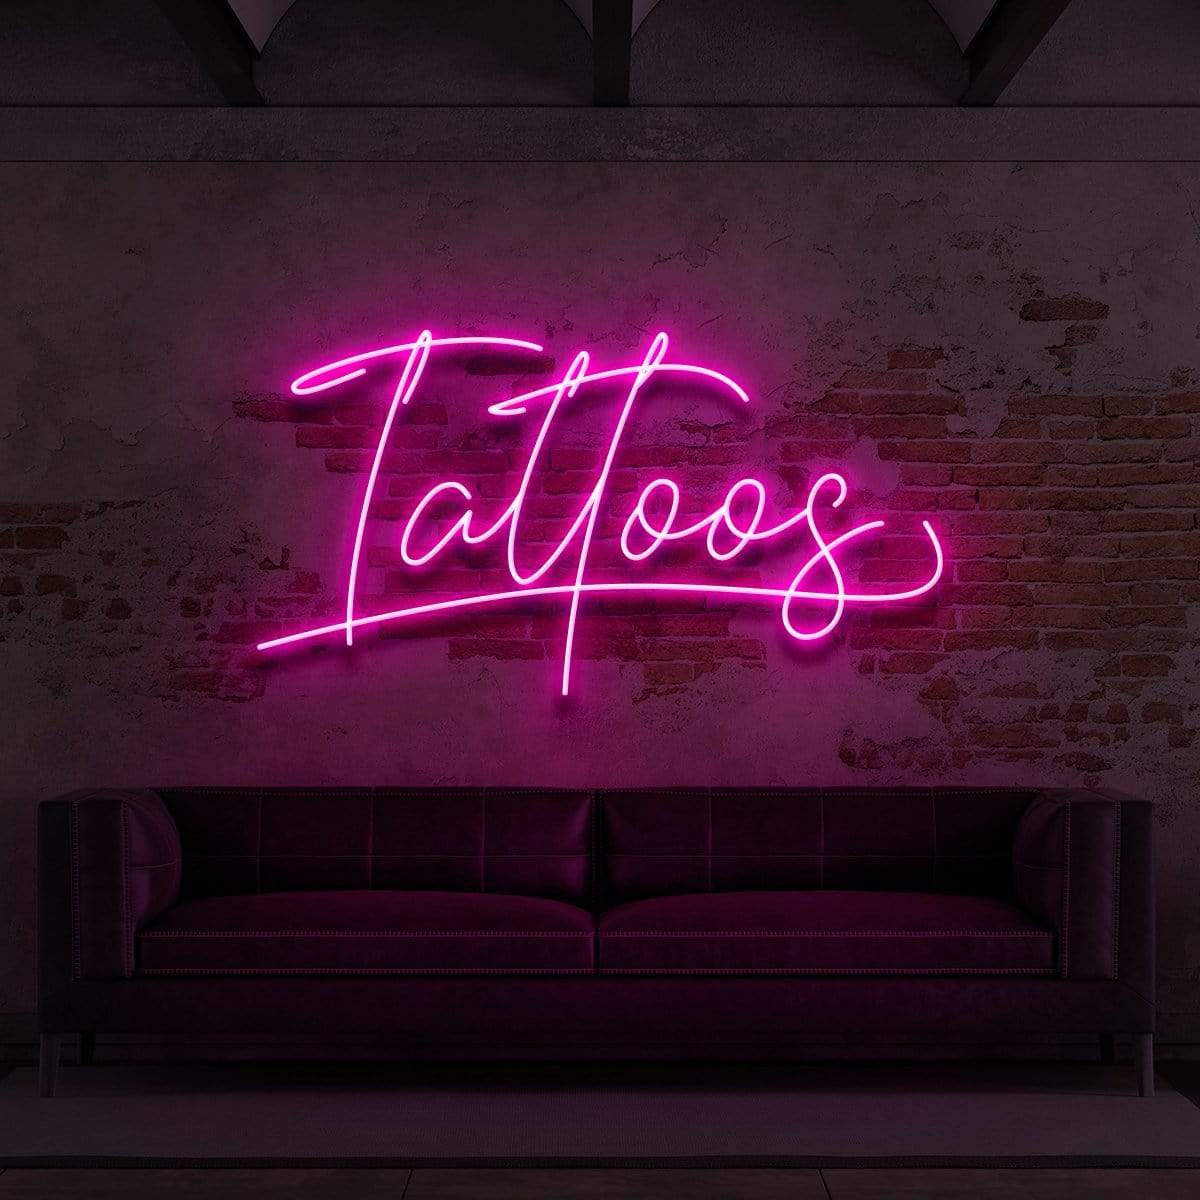 "Tattoos Cursive" Neon Sign for Tattoo Parlours